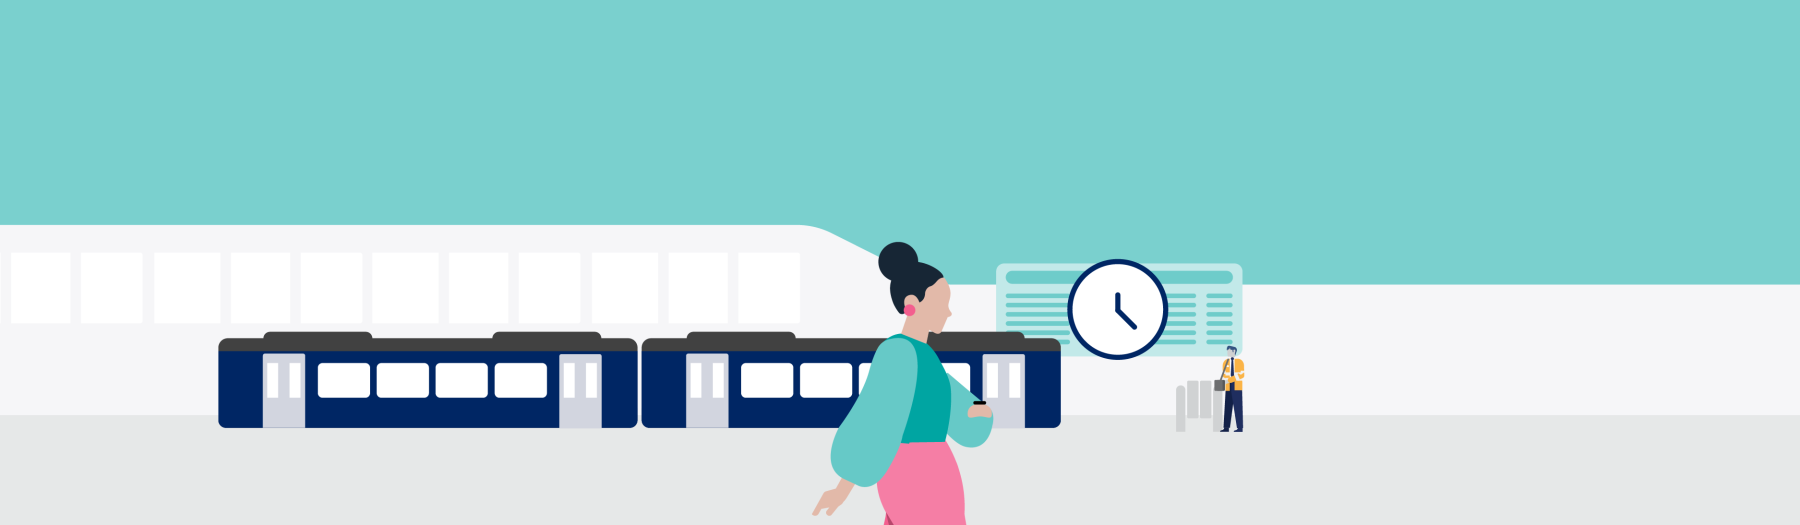 Illustration of train with woman walking and clock in background